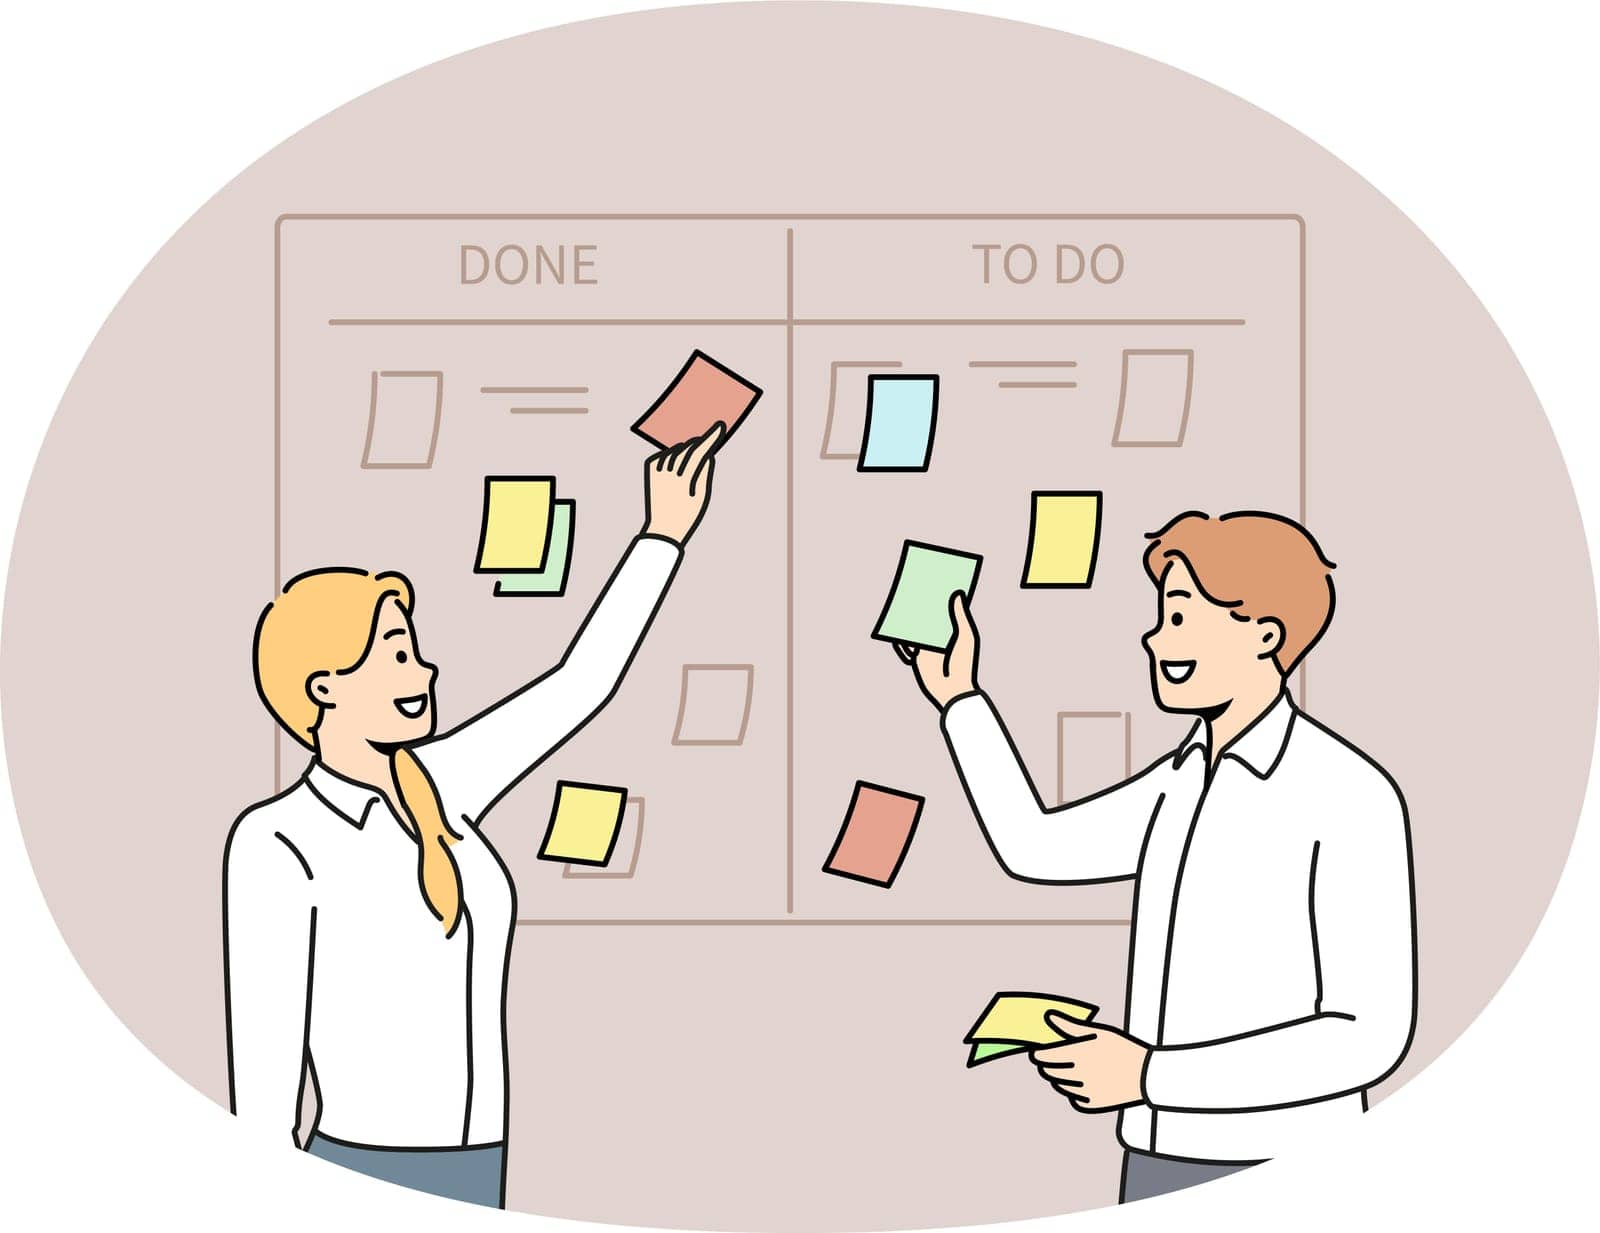 Smiling businesspeople brainstorm manage tasks on scum board in office. Happy employee discuss business projects at workplace. Teamwork and time management. Vector illustration.